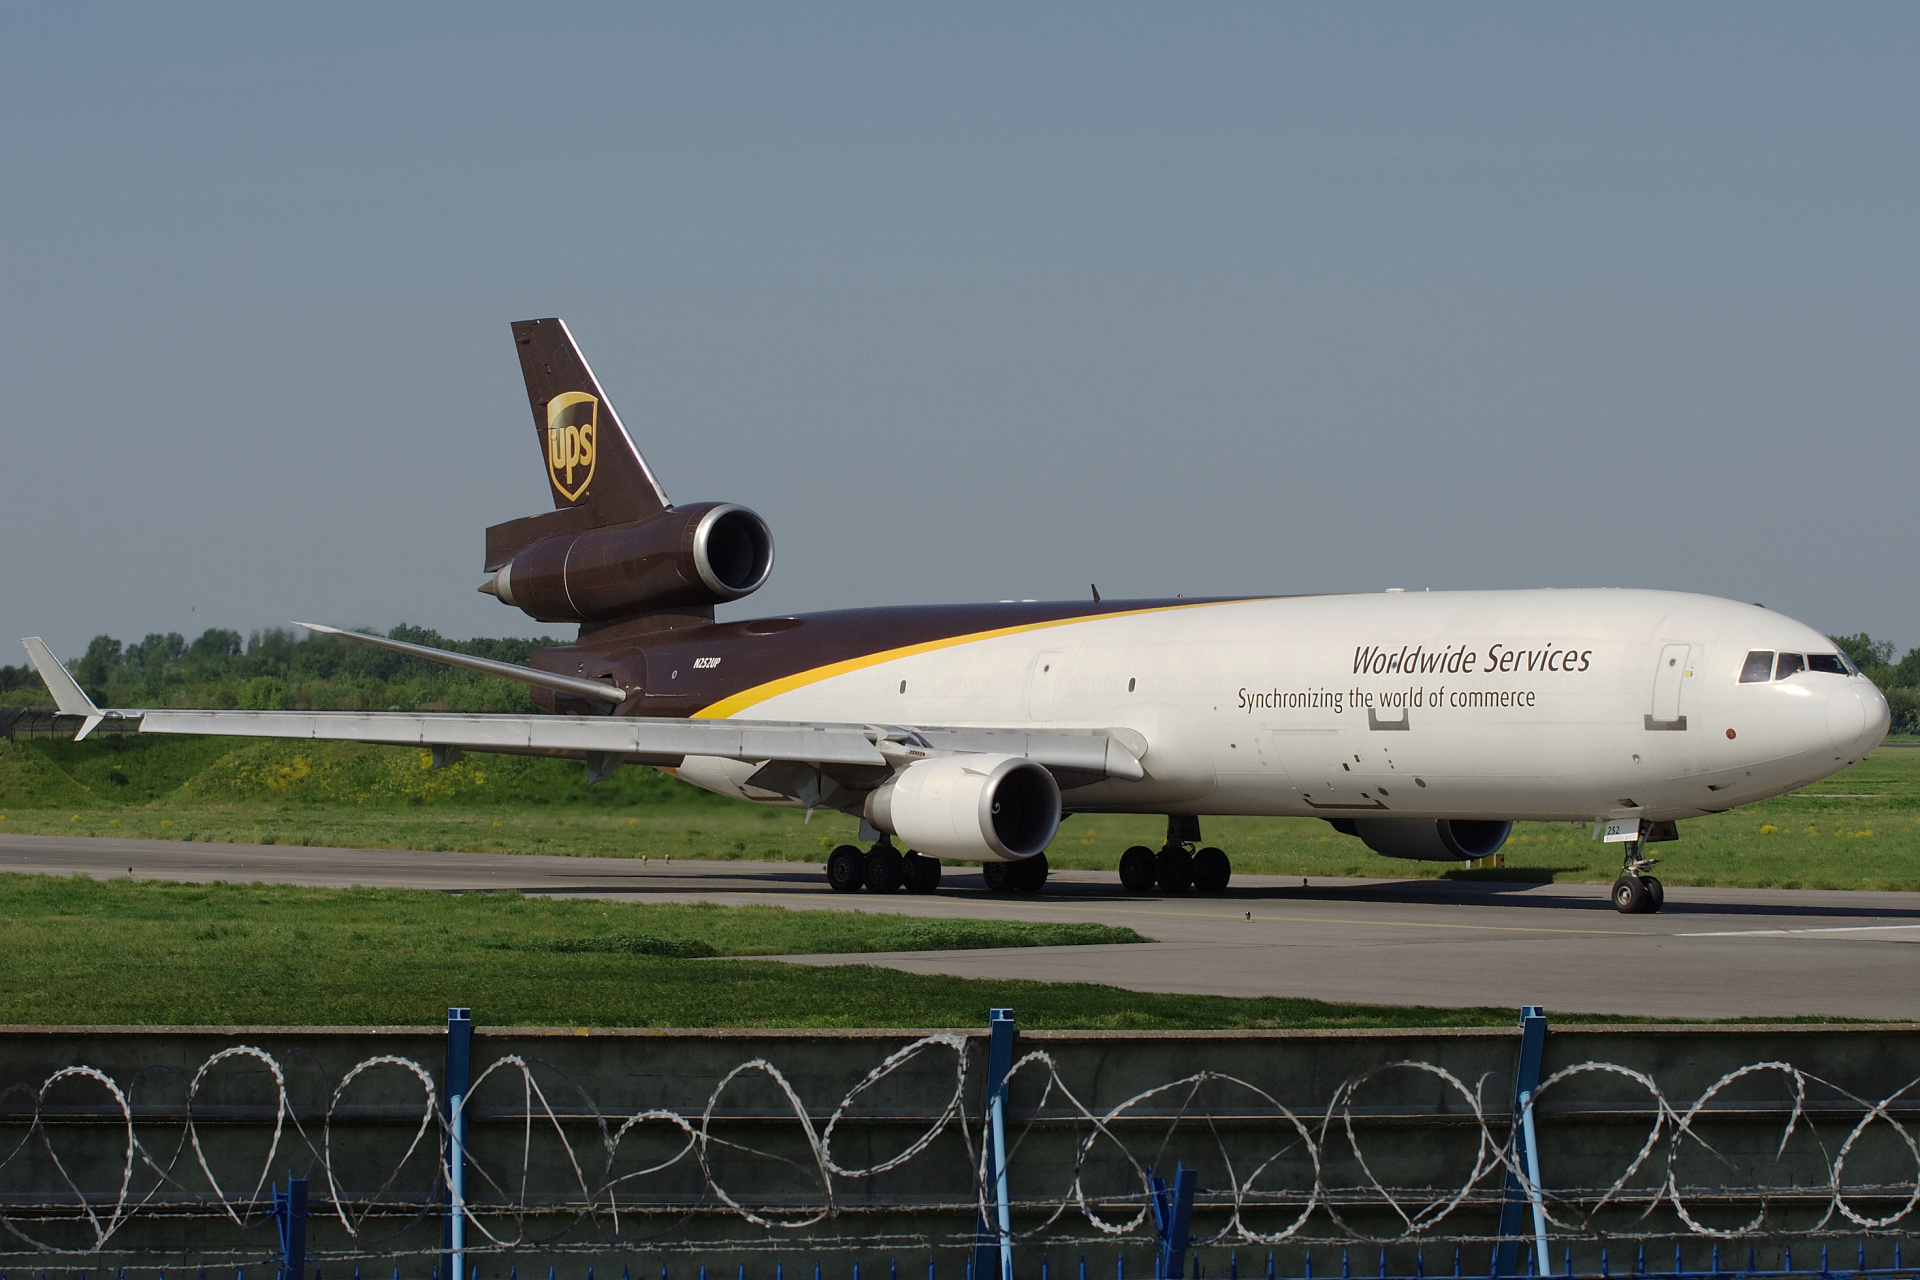 N252UP, United Parcel Service (UPS) Airlines (Aircraft » EPWA Spotting » McDonnell Douglas MD-11F)